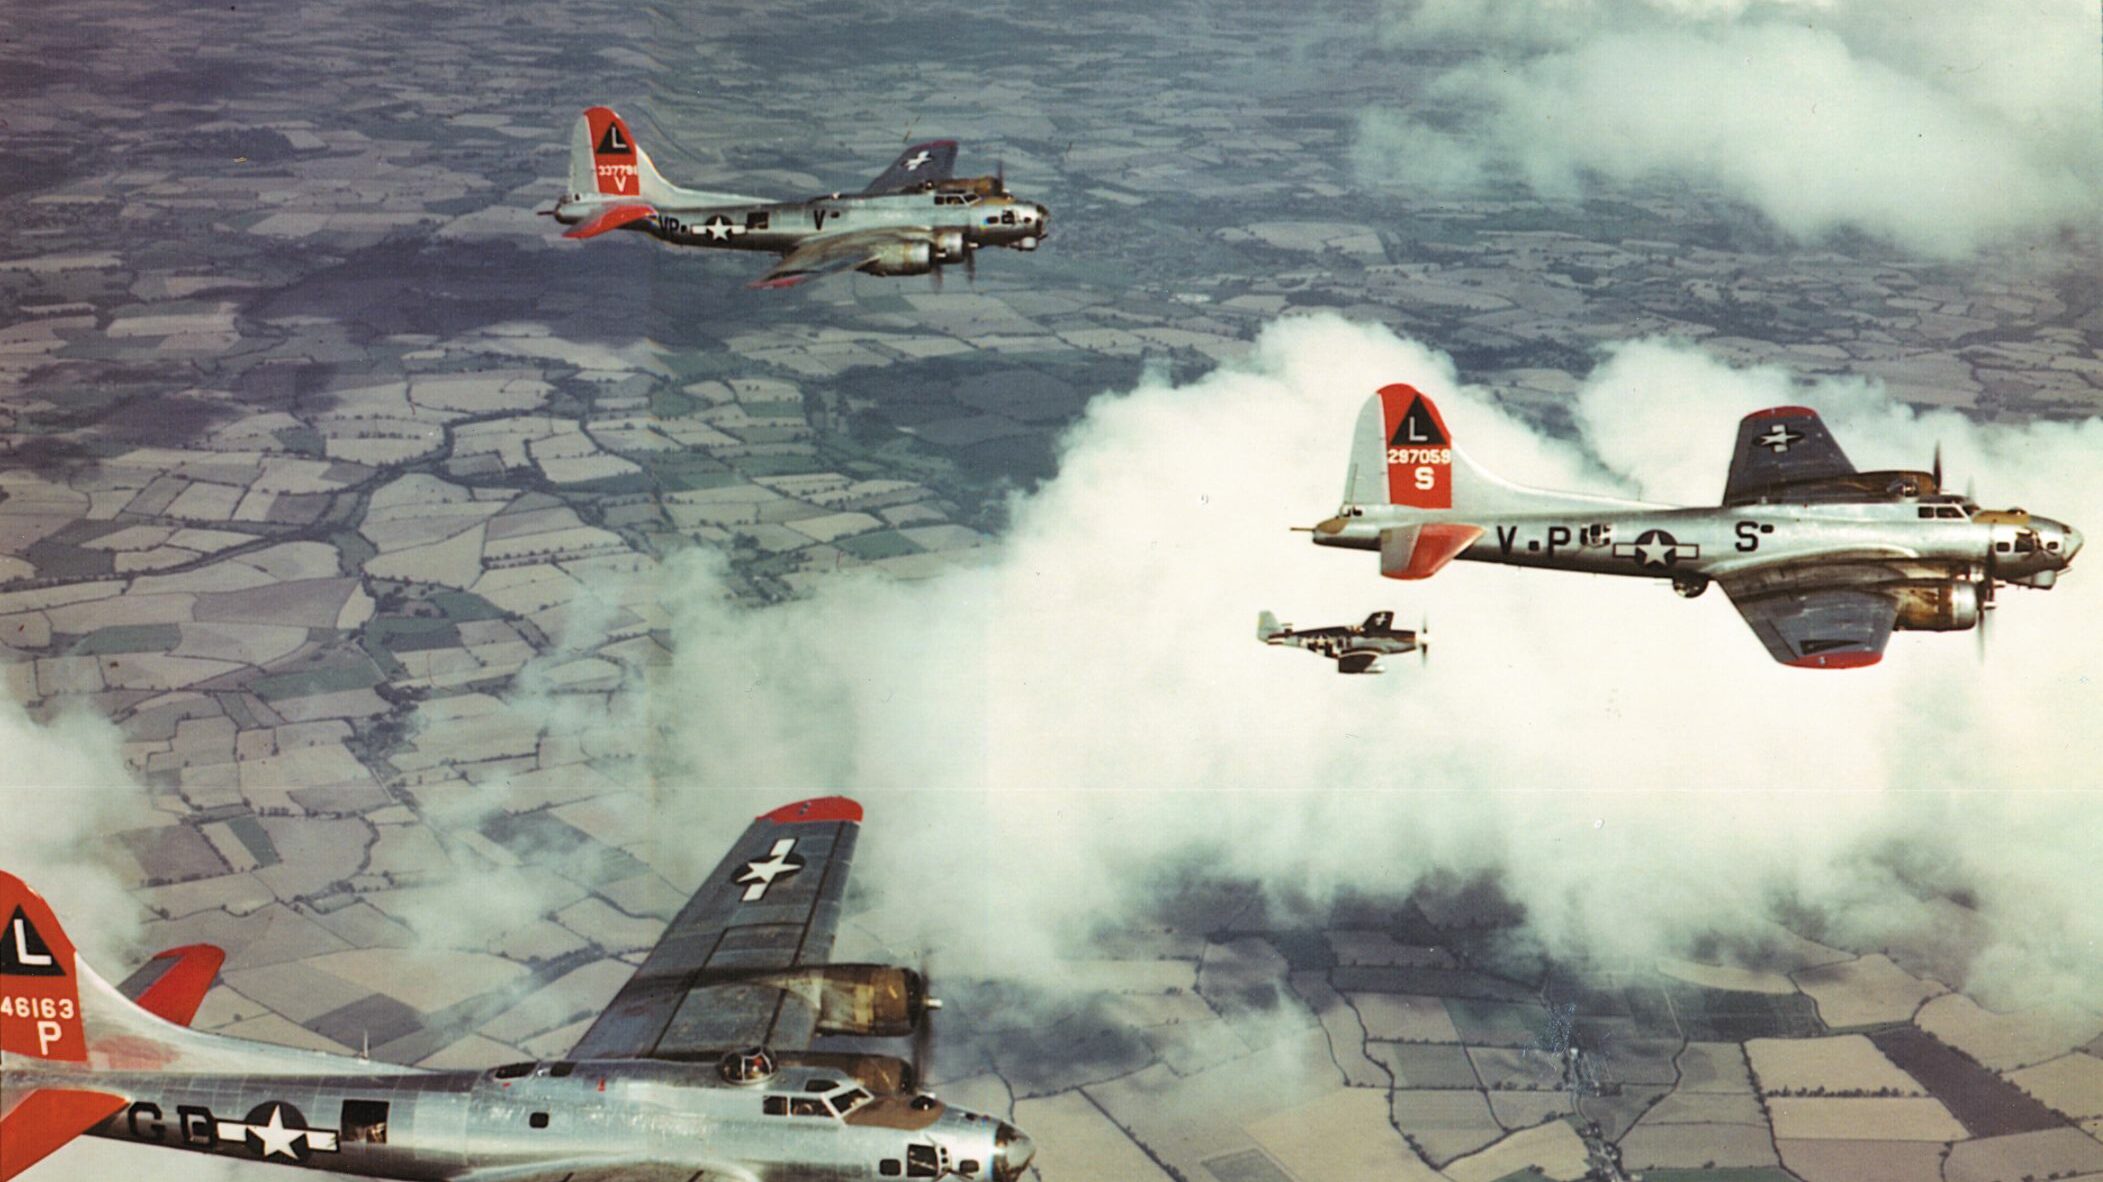 B-17s of the 8th Air Force, accompanied by fighters, cruise over England.